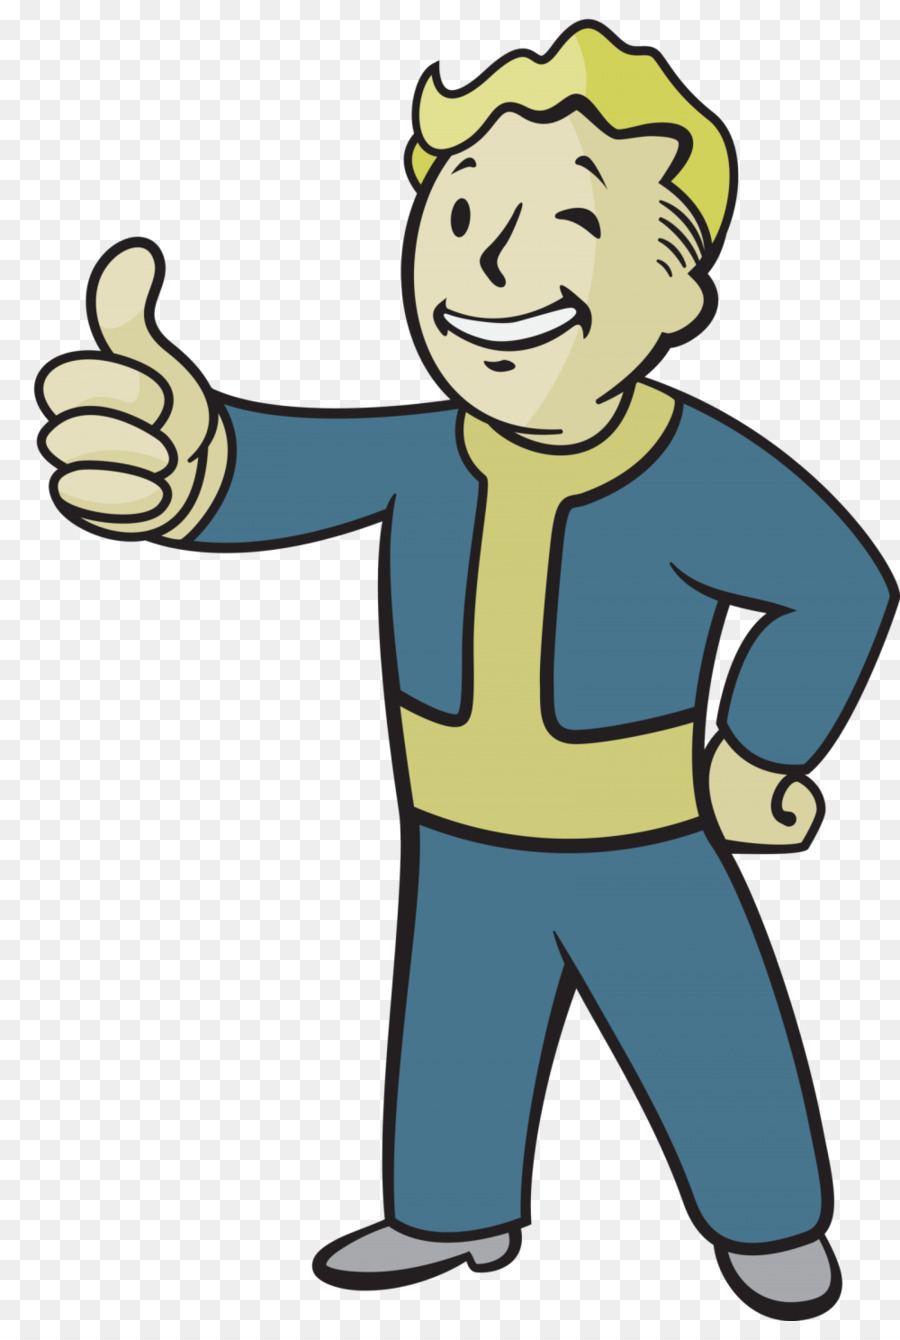 Fallout PNG - 172512